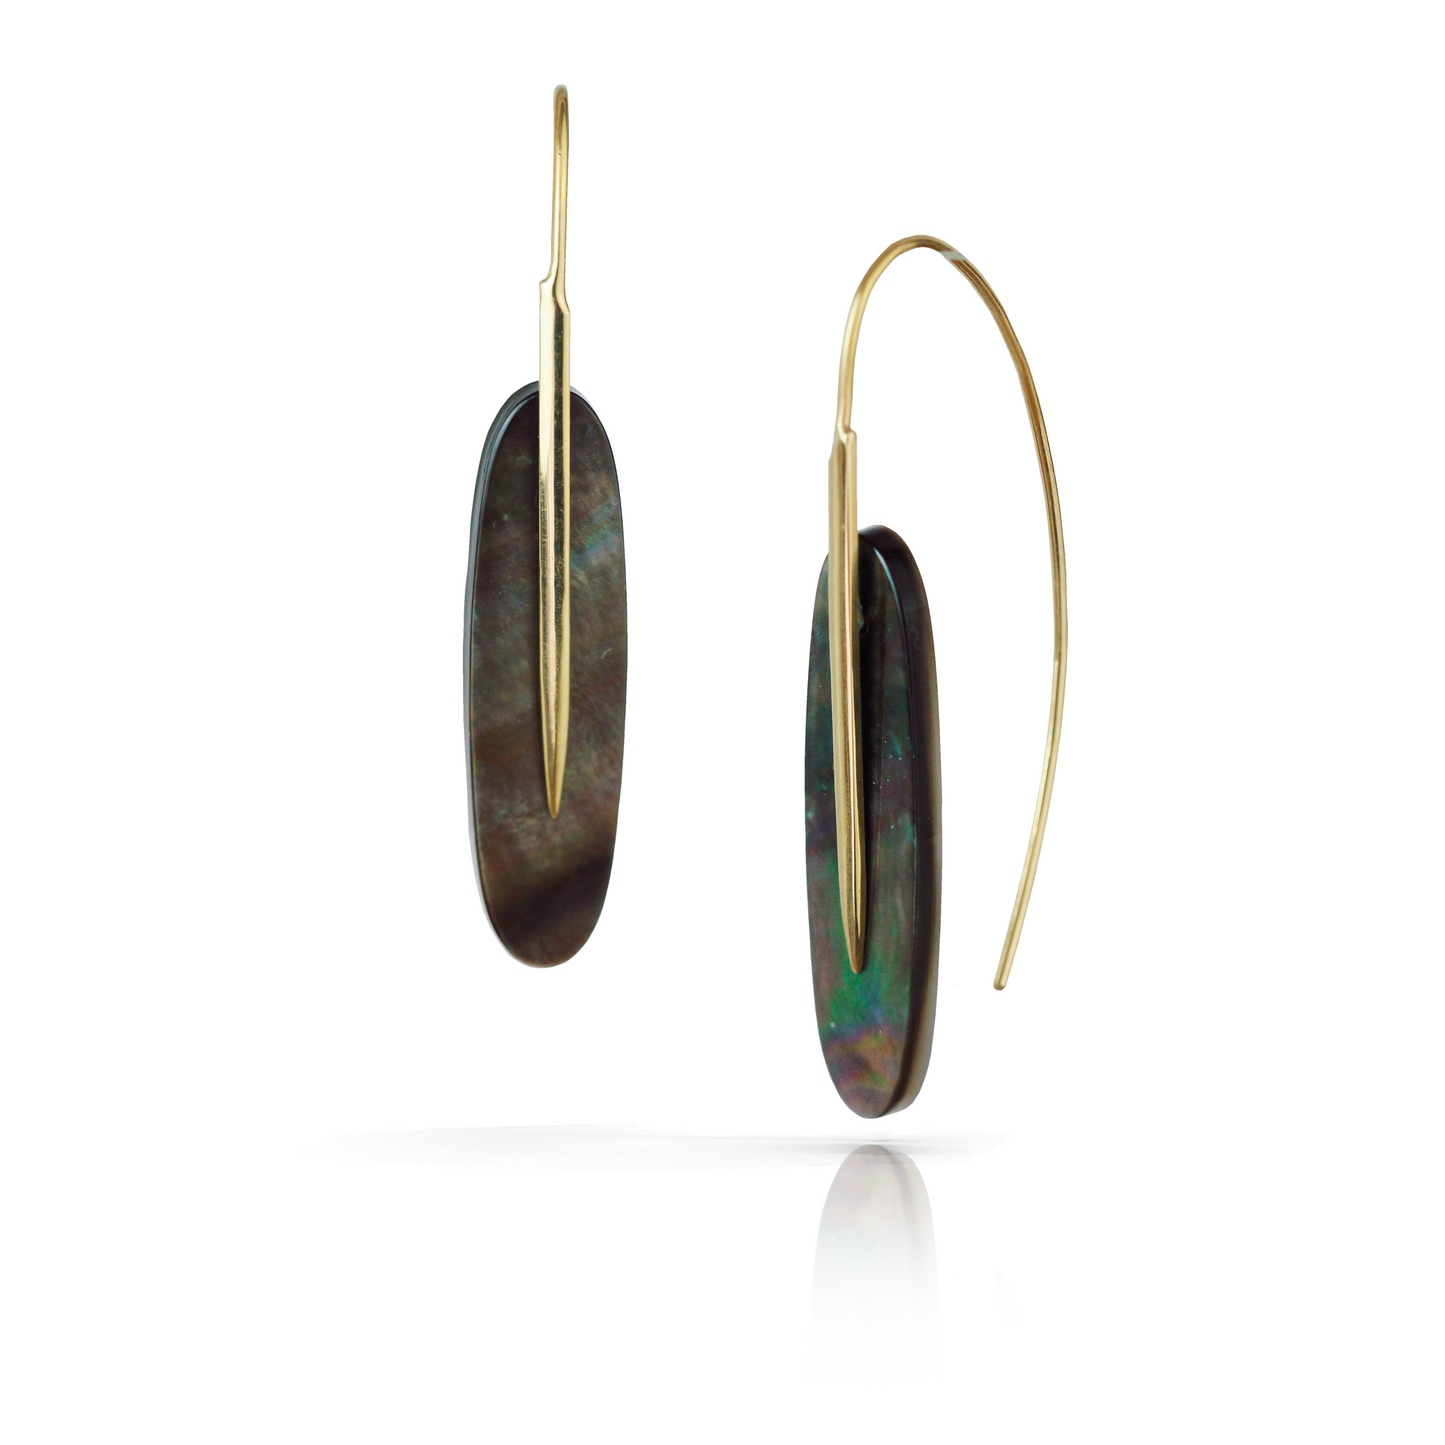 Medium Feather Earrings in 18k Gold and Black Mother of Pearl